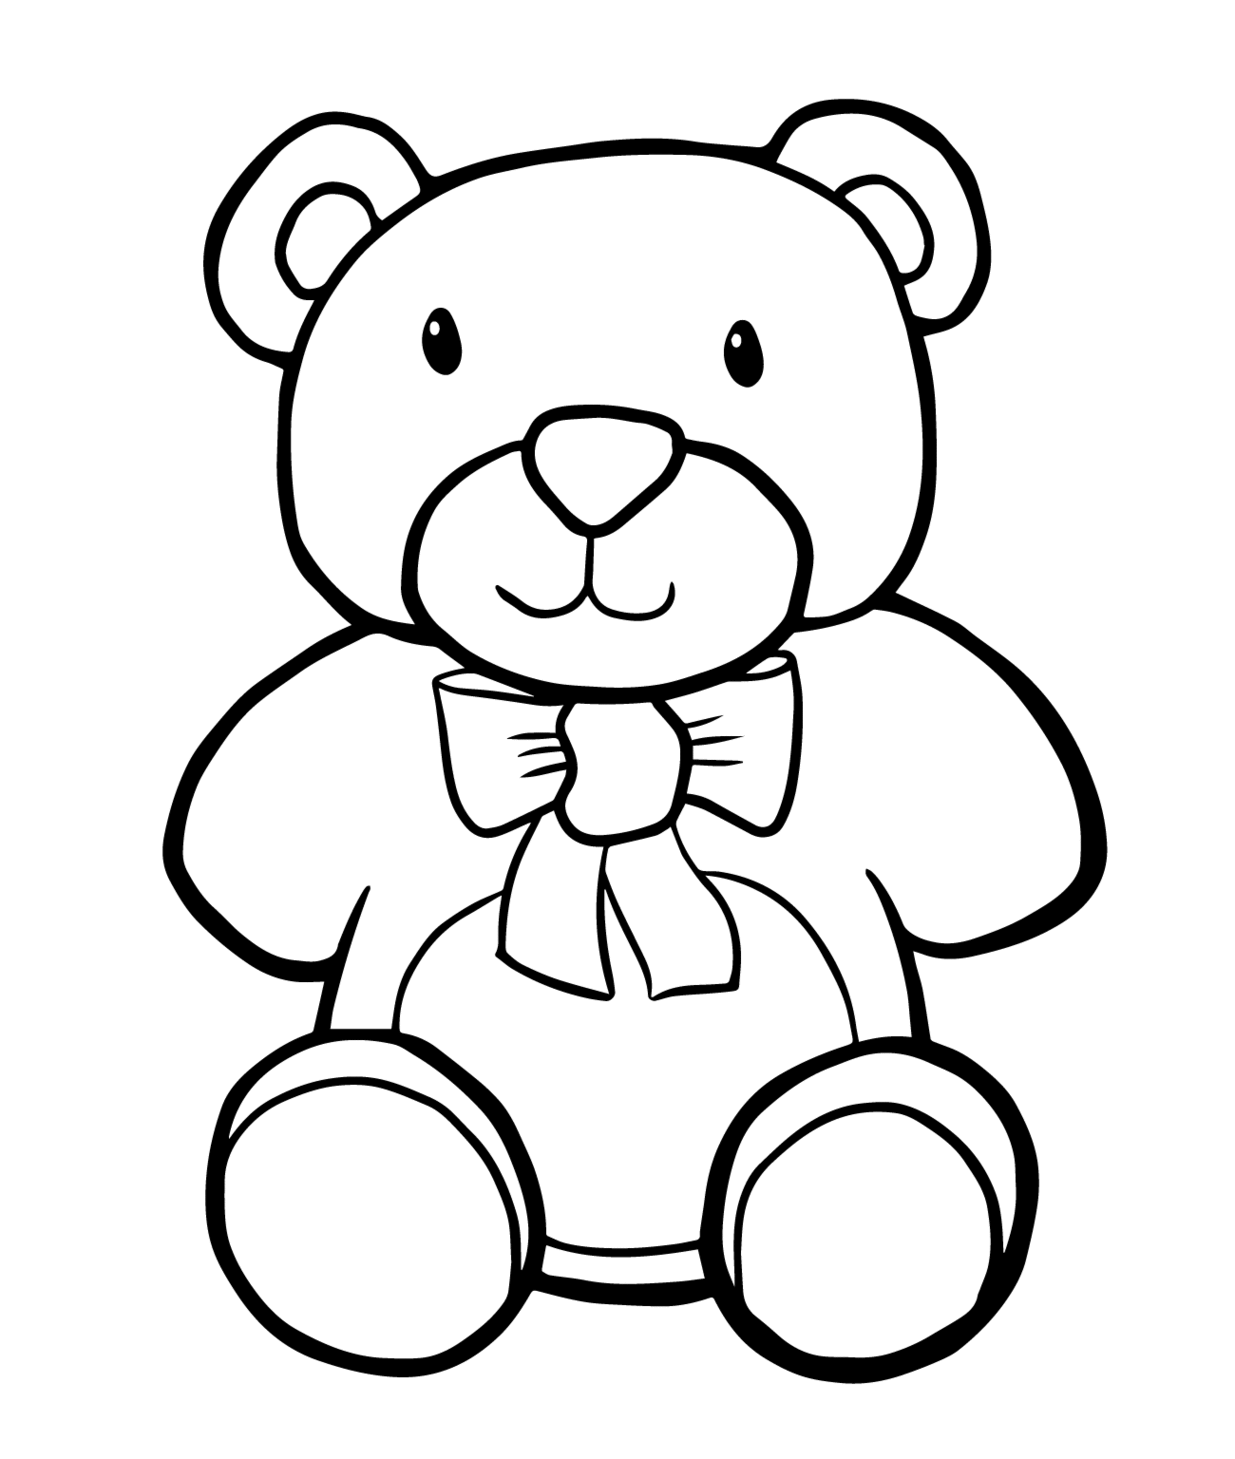 Teddy bear clipart black and white pencil in color teddy gif